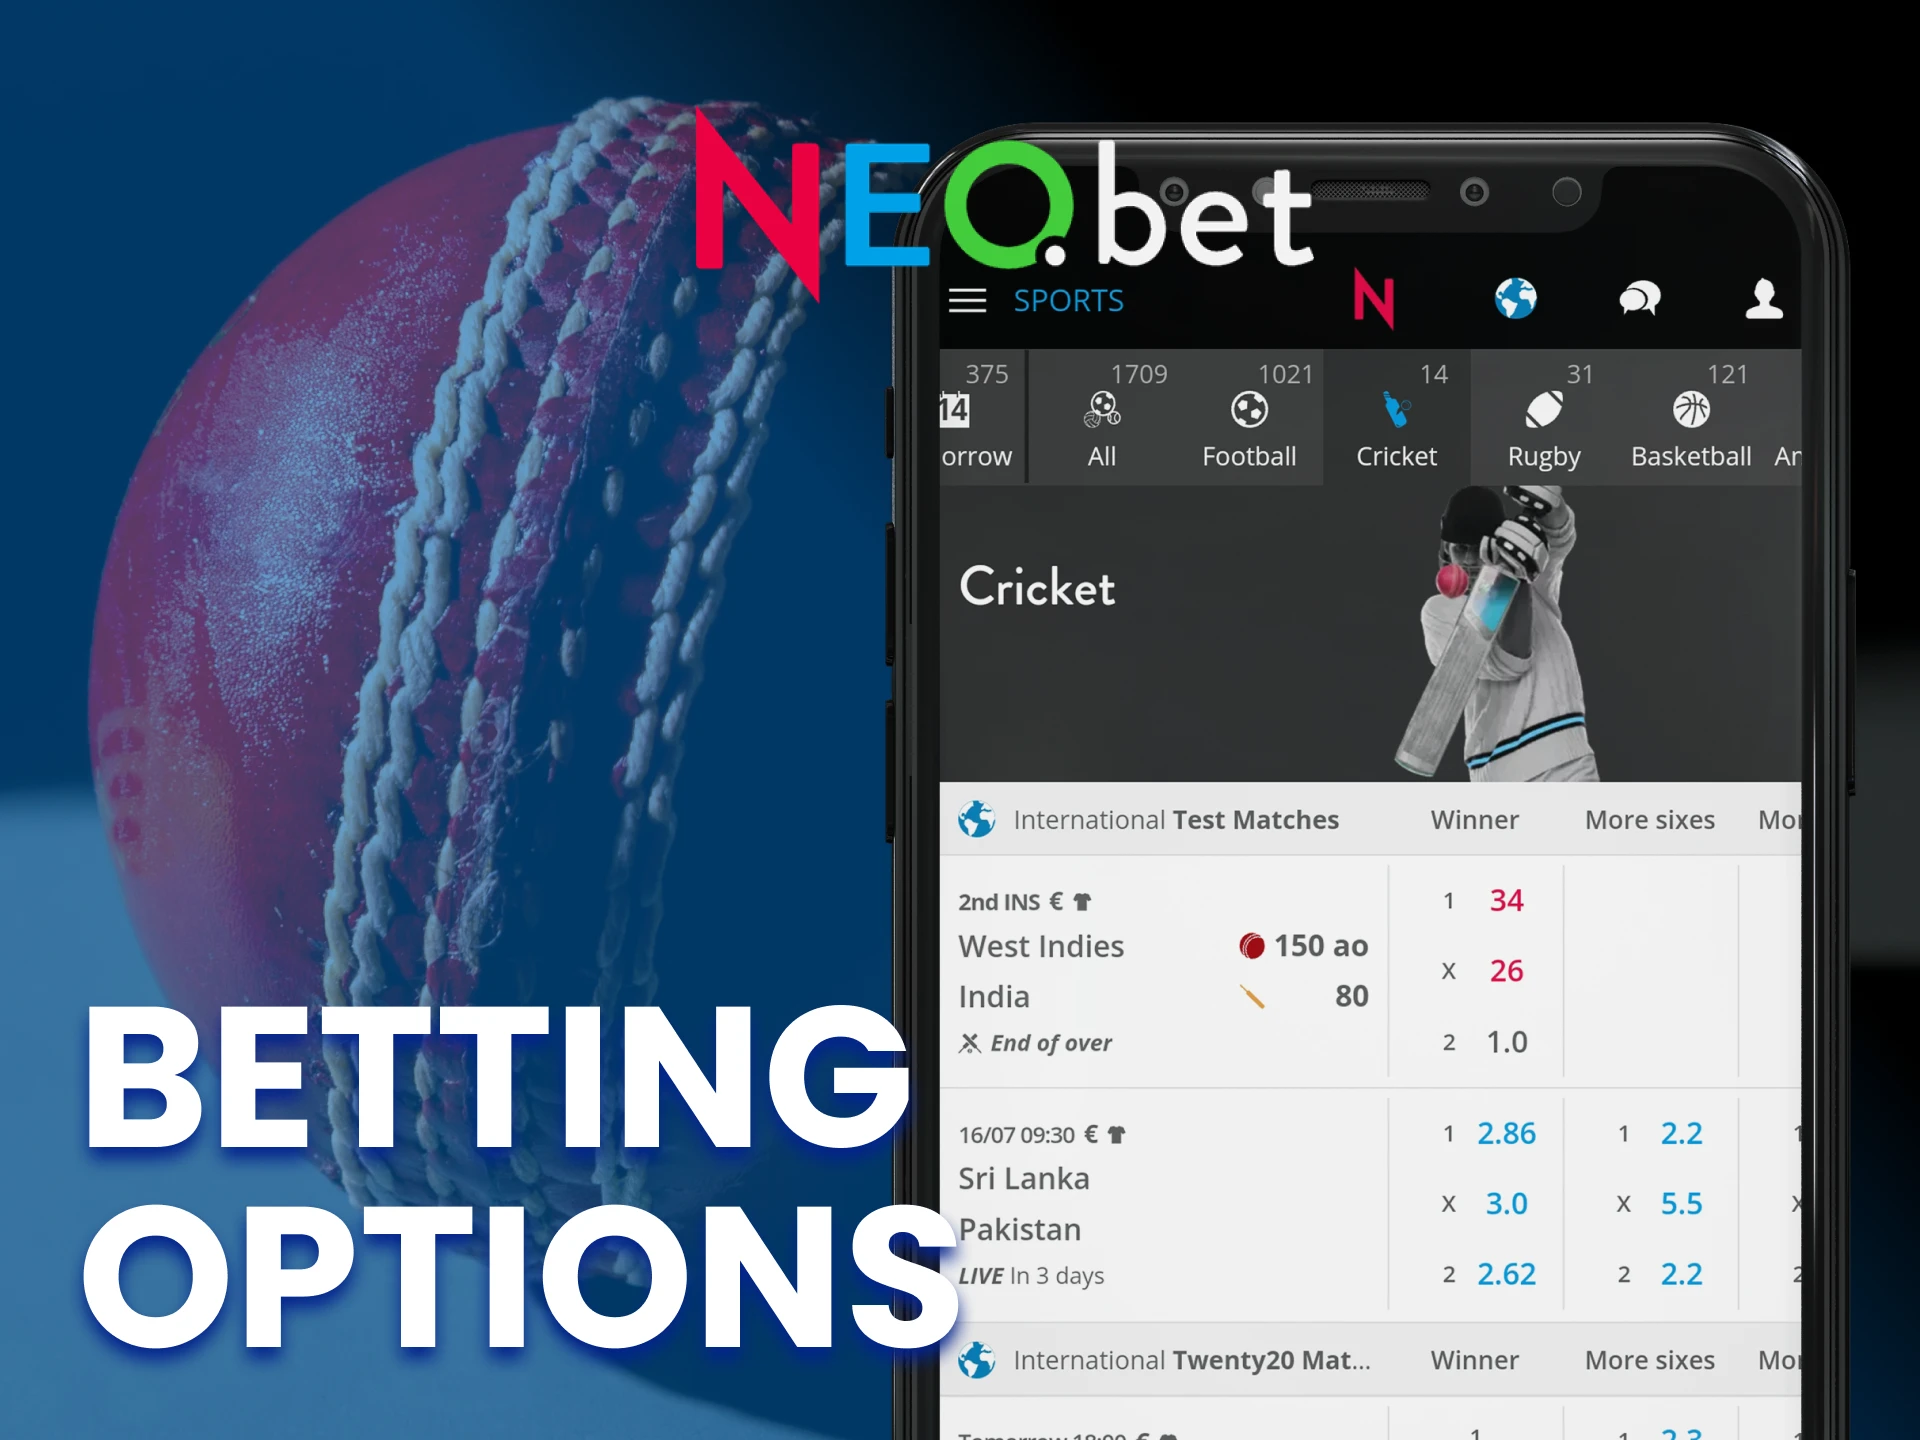 Try all the options for sports betting on the NEO.bet app.